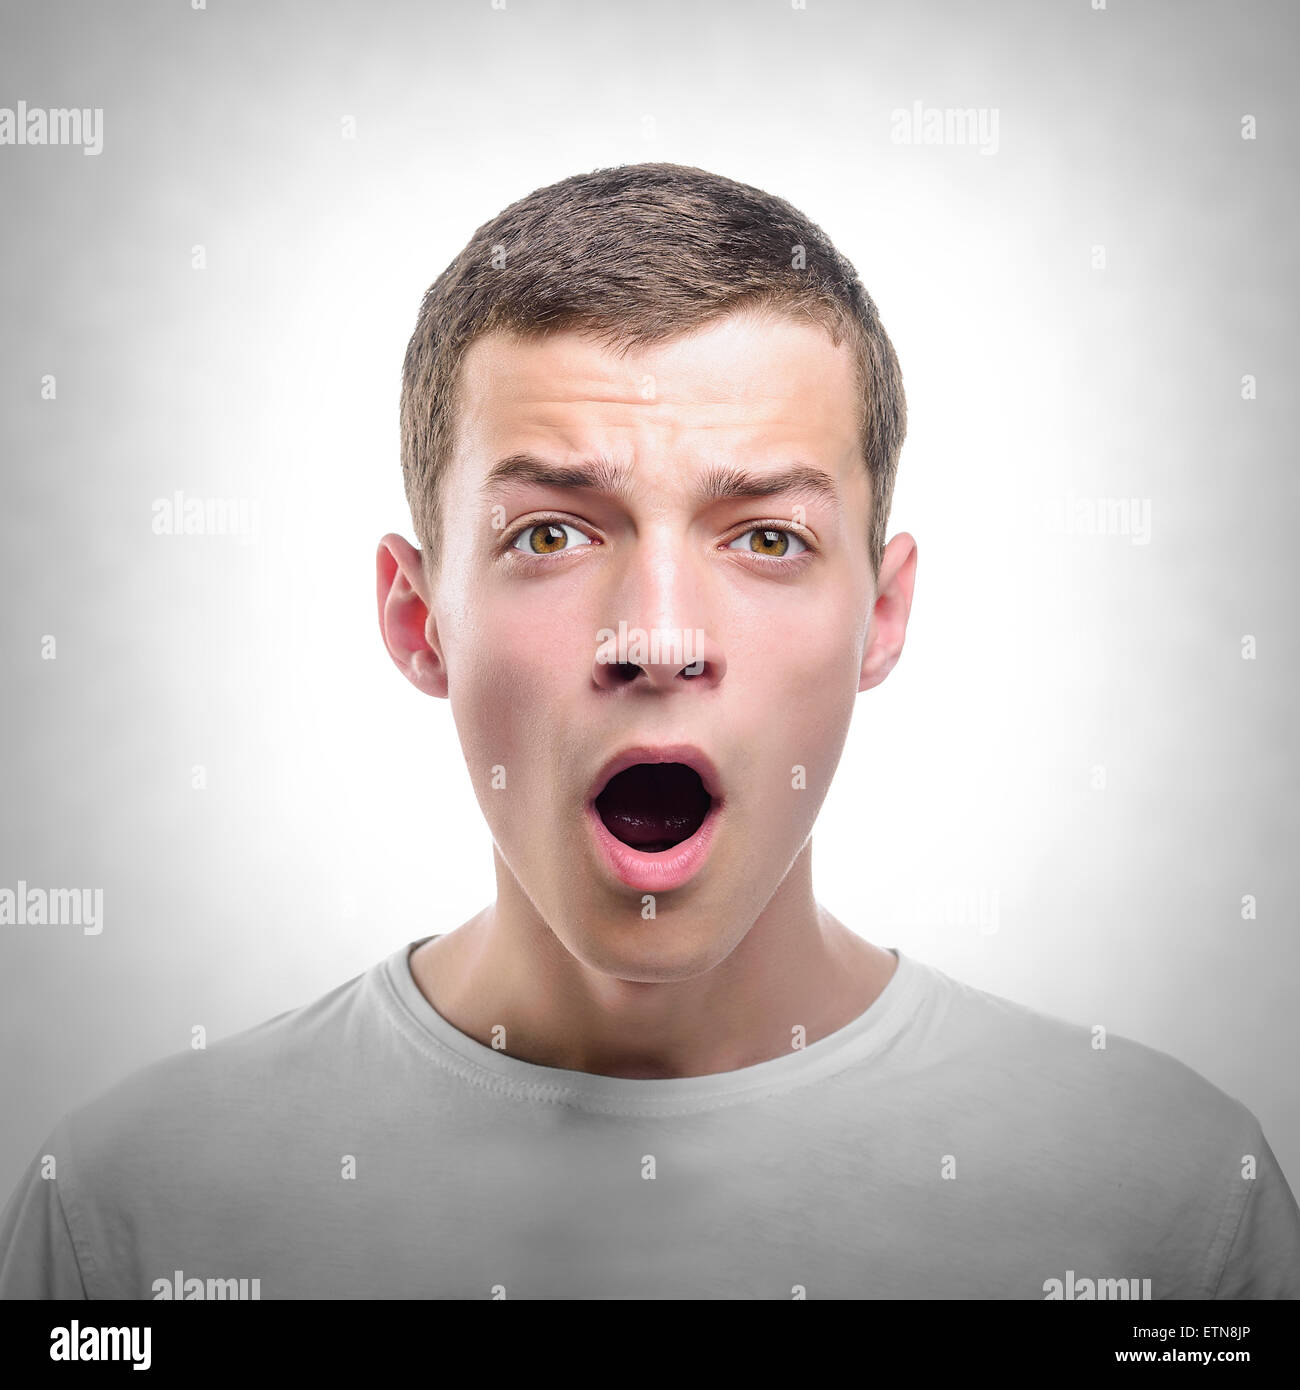 Surprised Young Man. Stock Photo